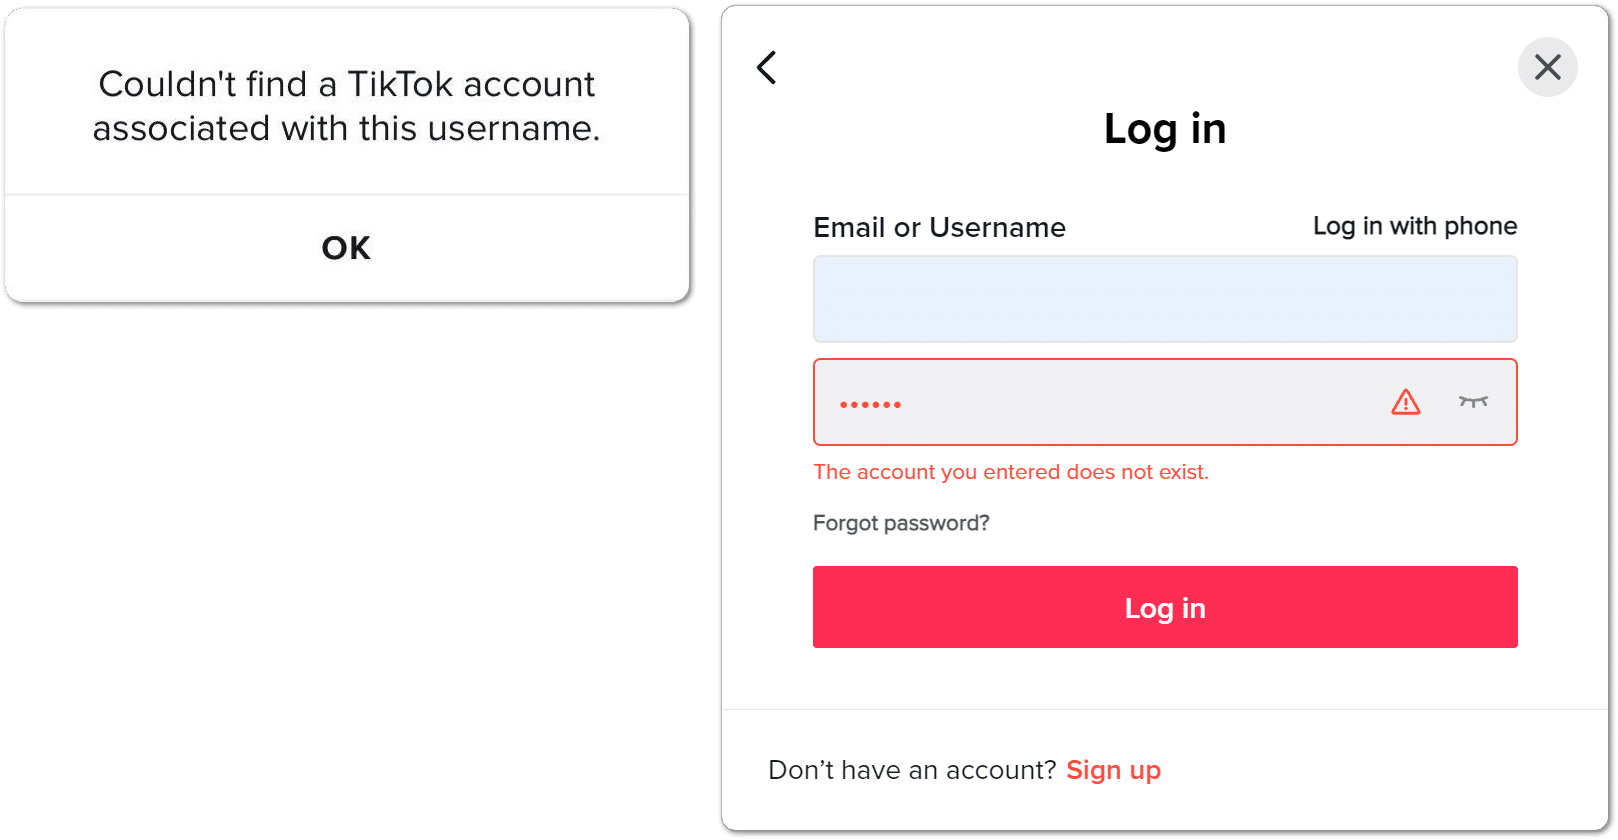 TikTok "The account you entered doesn't exist" error message